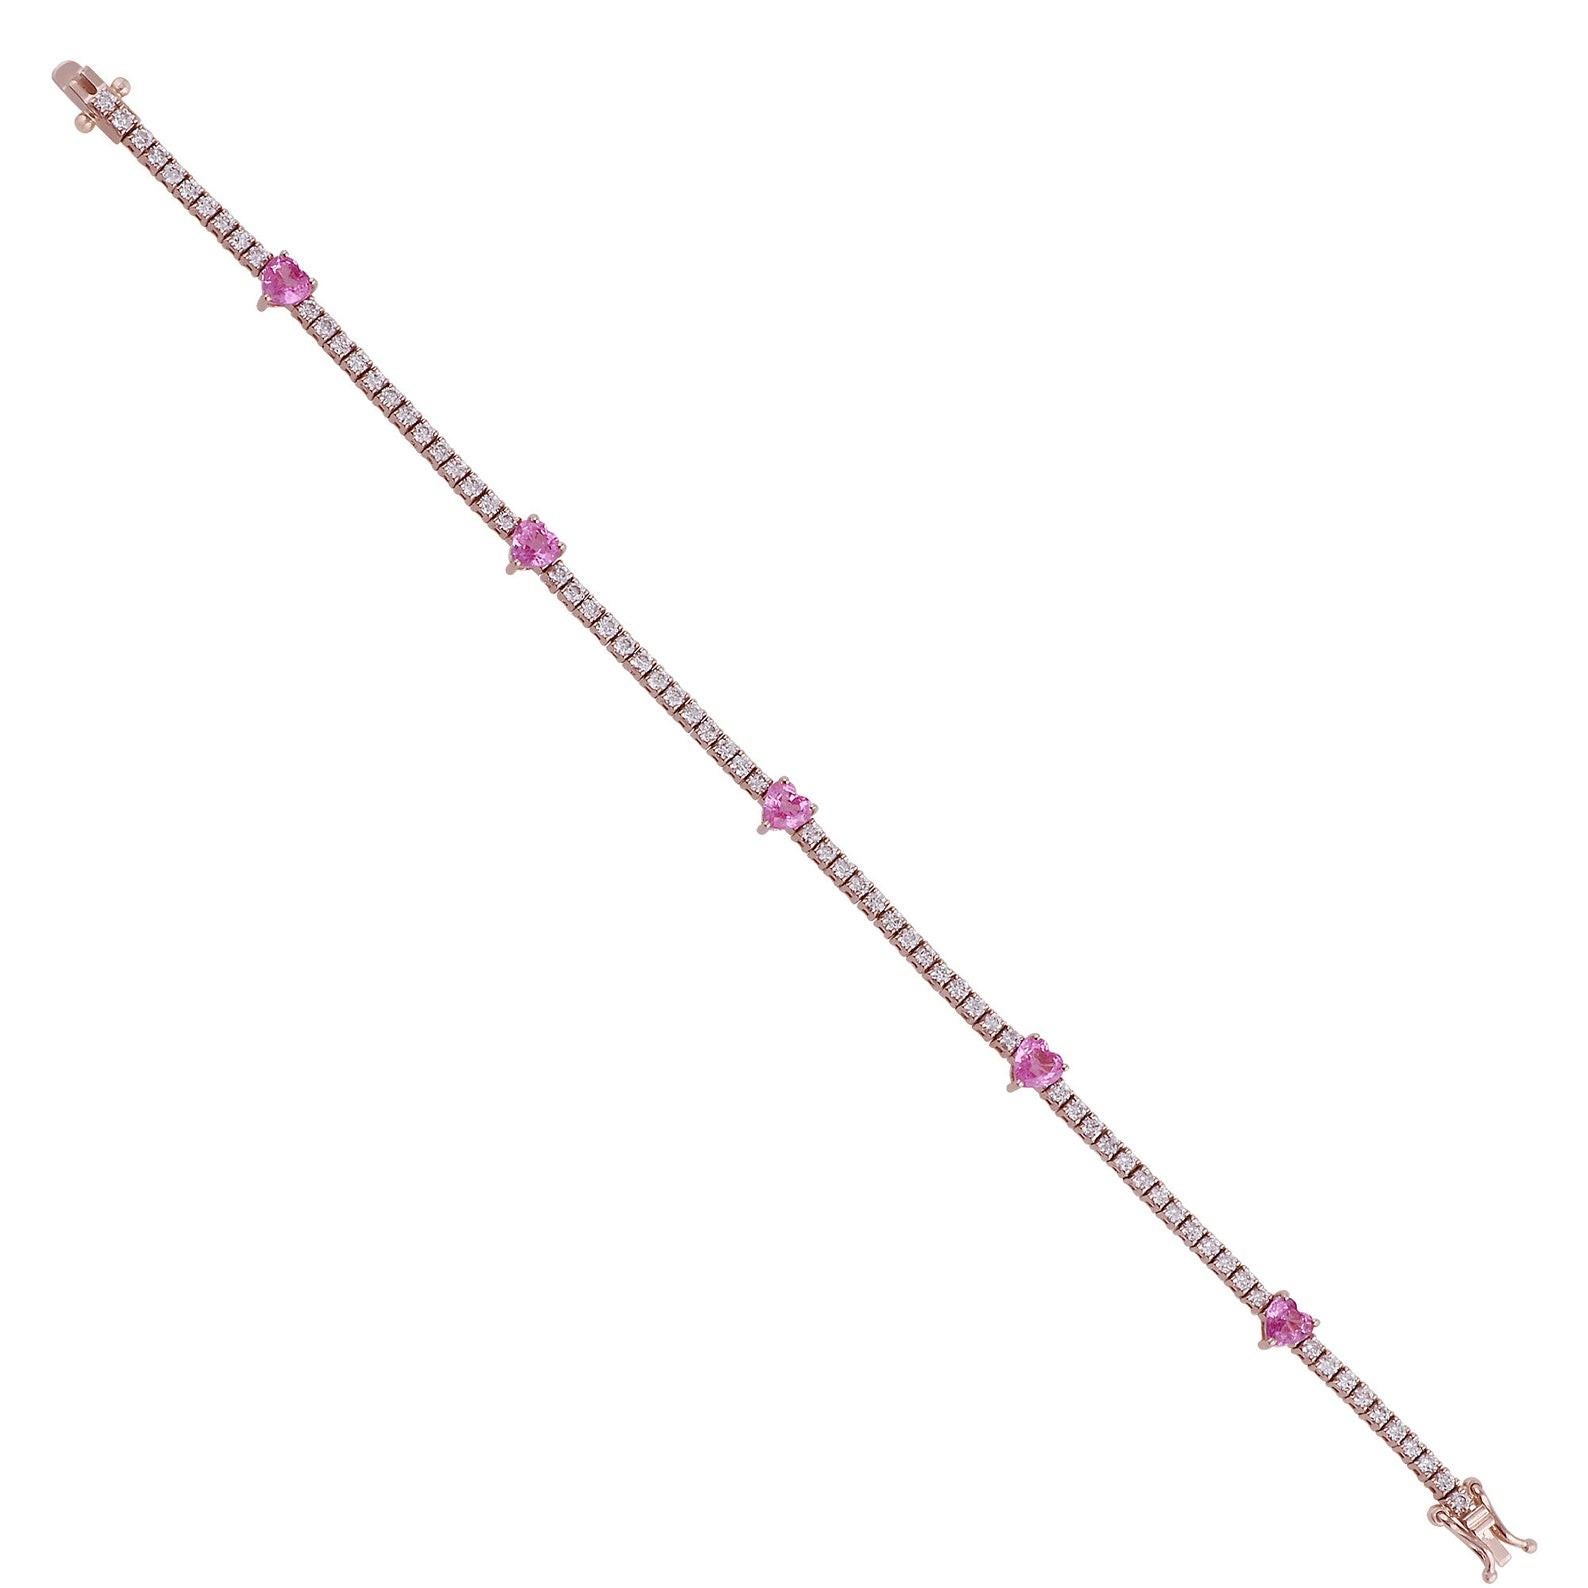 Cast from 14-karat gold, this beautiful bracelet is set with 1.77 carats Pink Sapphire and 1.40 carats of sparkling diamonds.  See other matching pieces.

FOLLOW MEGHNA JEWELS storefront to view the latest collection & exclusive pieces. Meghna